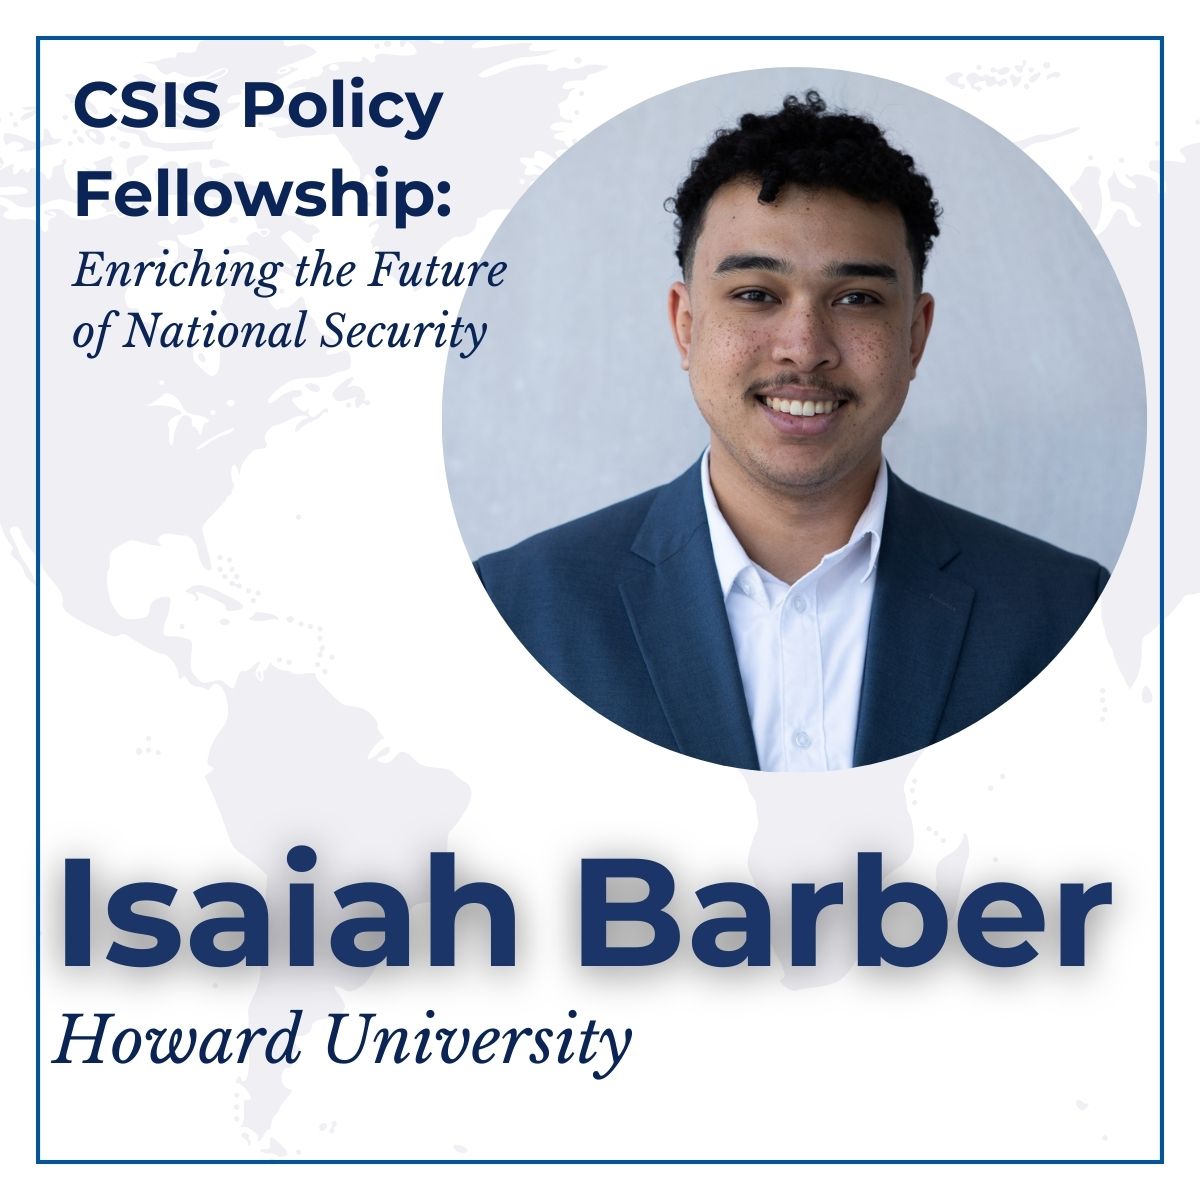 In our next #PolicyFellowSpotlight, we are thrilled to introduce Isaiah Barber. Isaiah is a senior at @HowardU where he majors in political science and international relations. He has interned at @CFR_org and the U.S. House of Representatives. Welcome to CSIS, Isaiah!